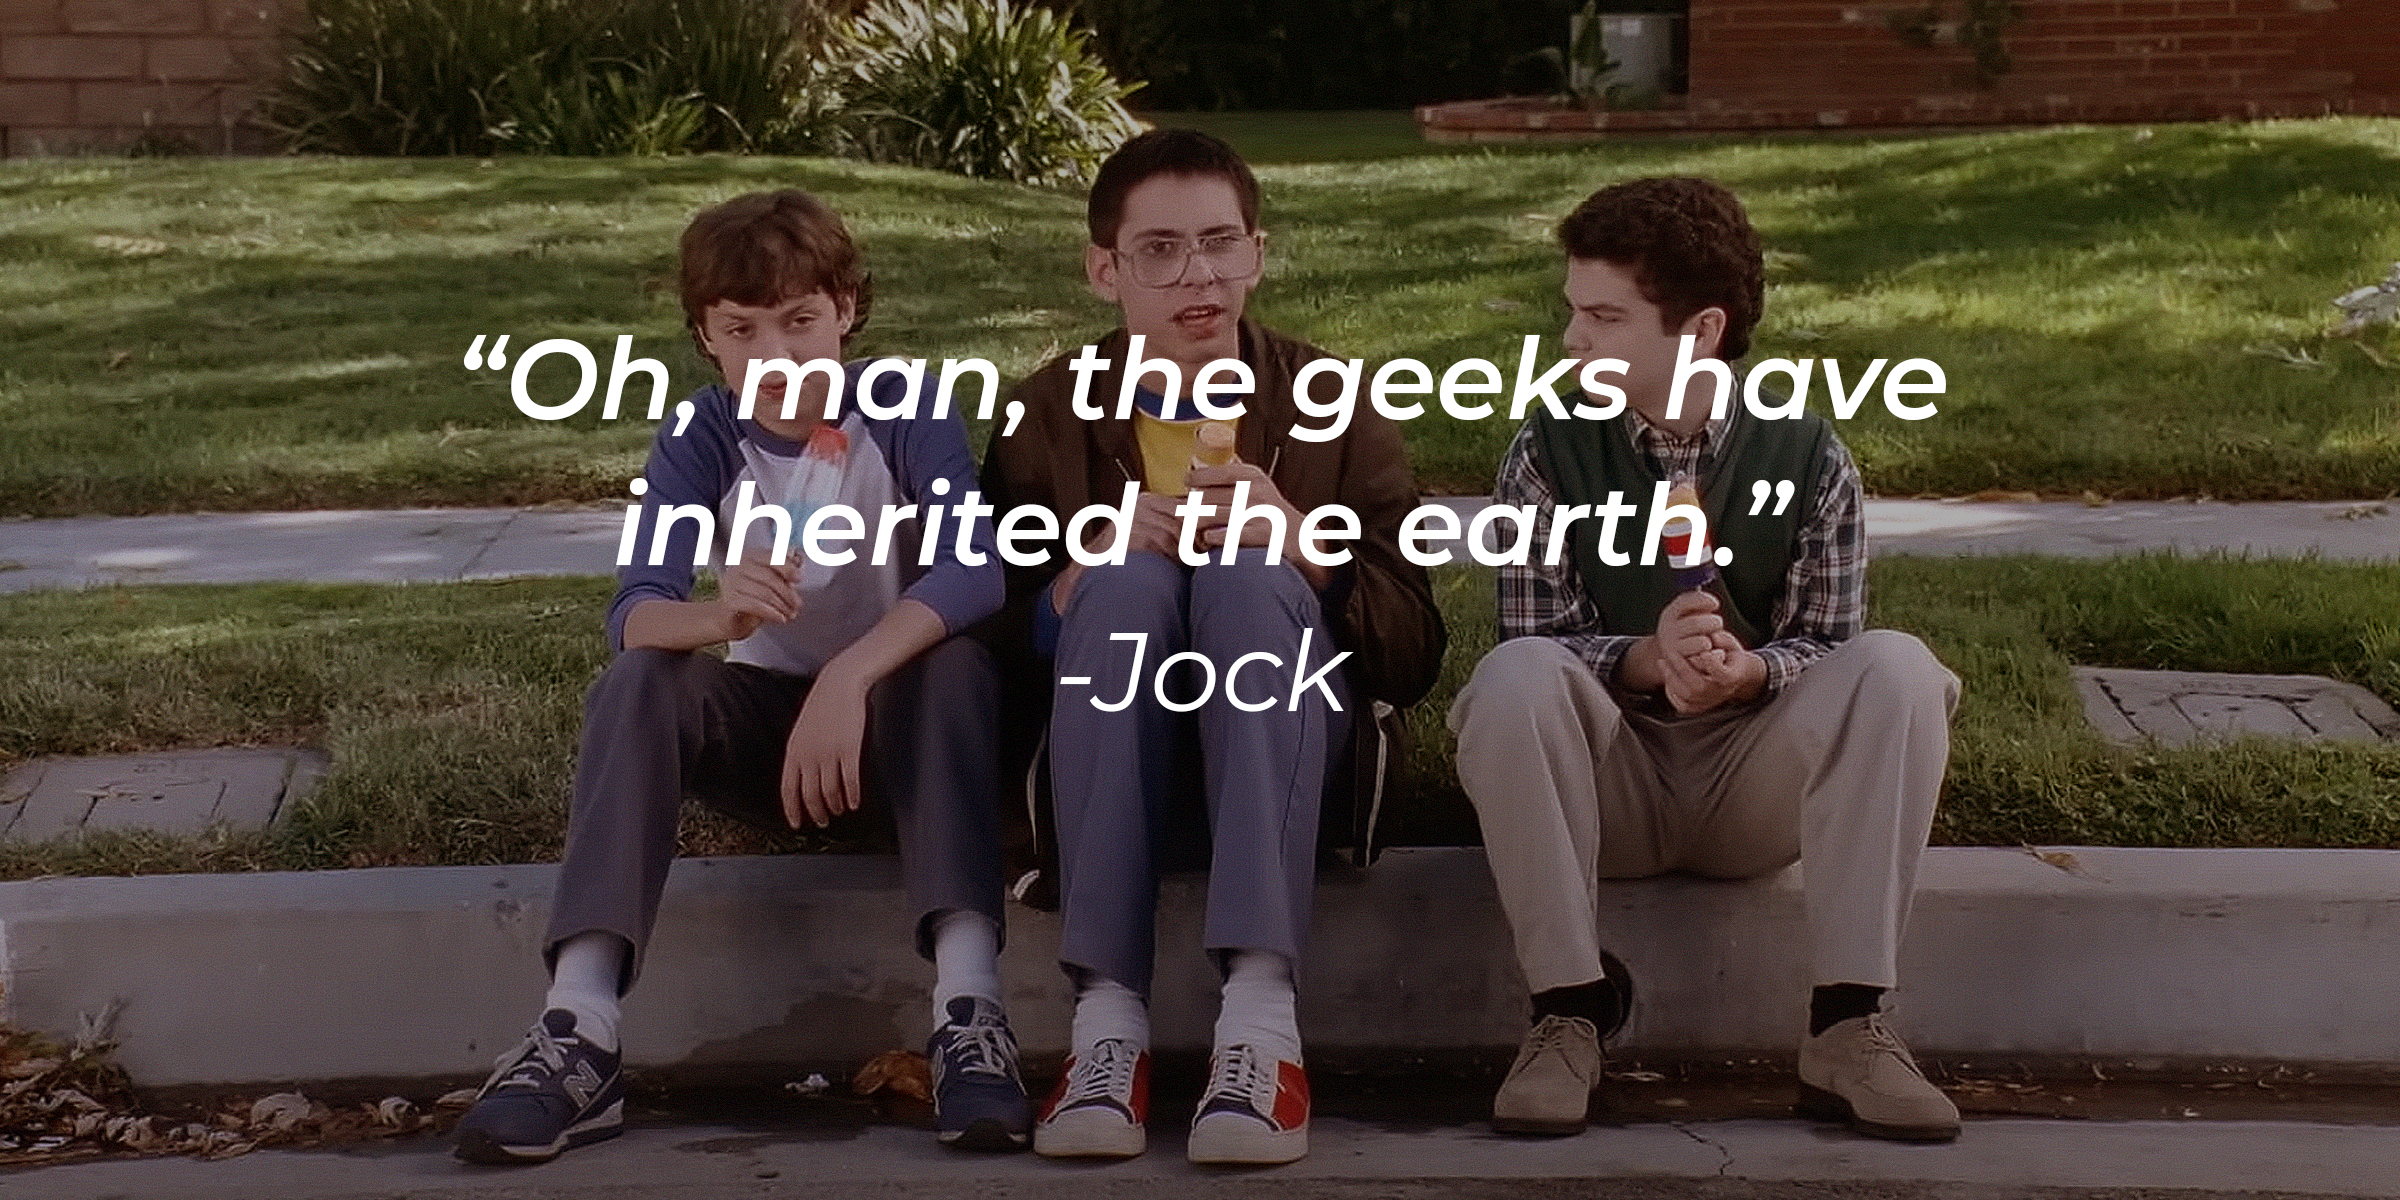 Photo of "Freak and Geeks" cast with the quote: "Oh, man, the geeks have inherited the earth." | Source: Youtube.com/paramountmovies